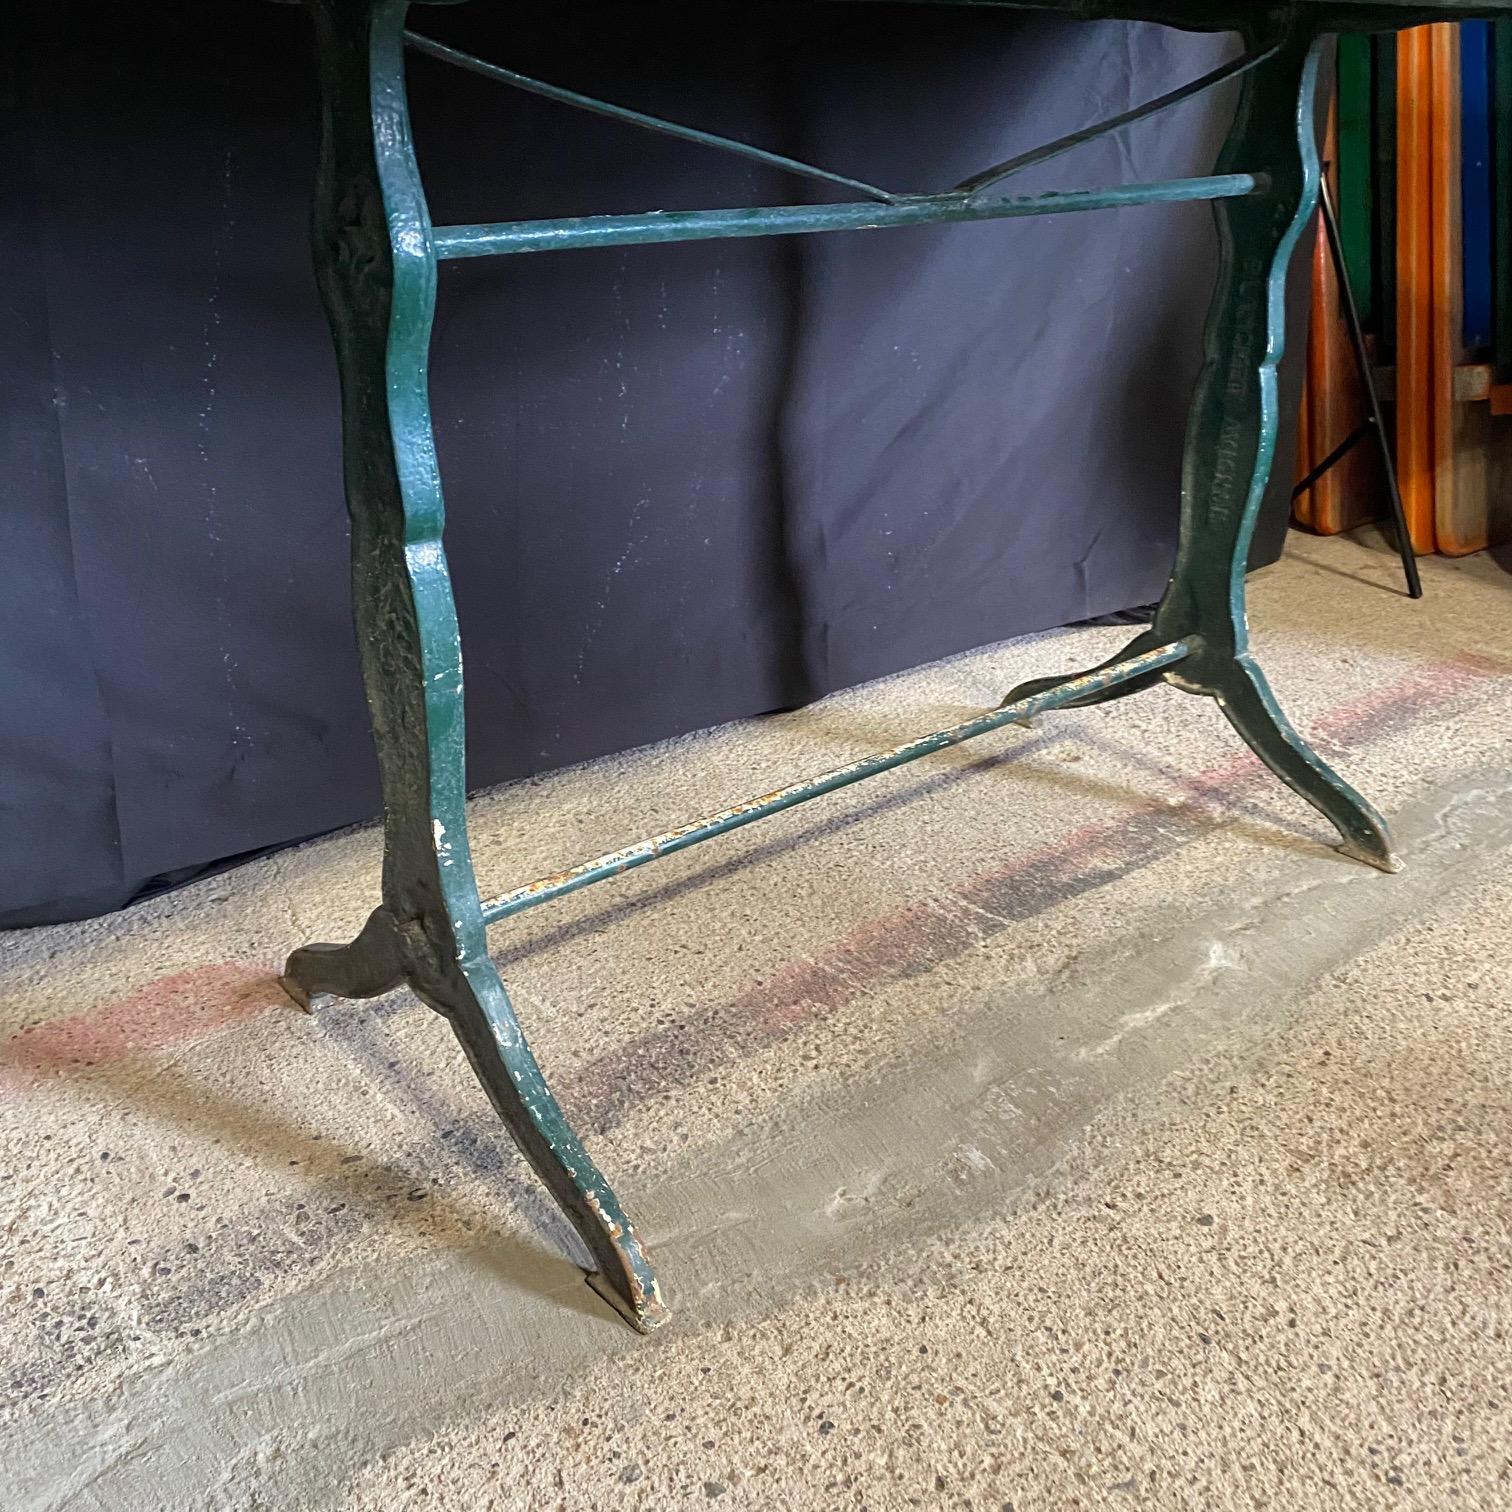 Stunning large versatile French marble top rectangular cafe table or writing desk with a classic Provencal green iron base. Marble is a stunning dark green marble with lovely veining - and large!  Exudes 1920s era French bistro charm. #7209
apron